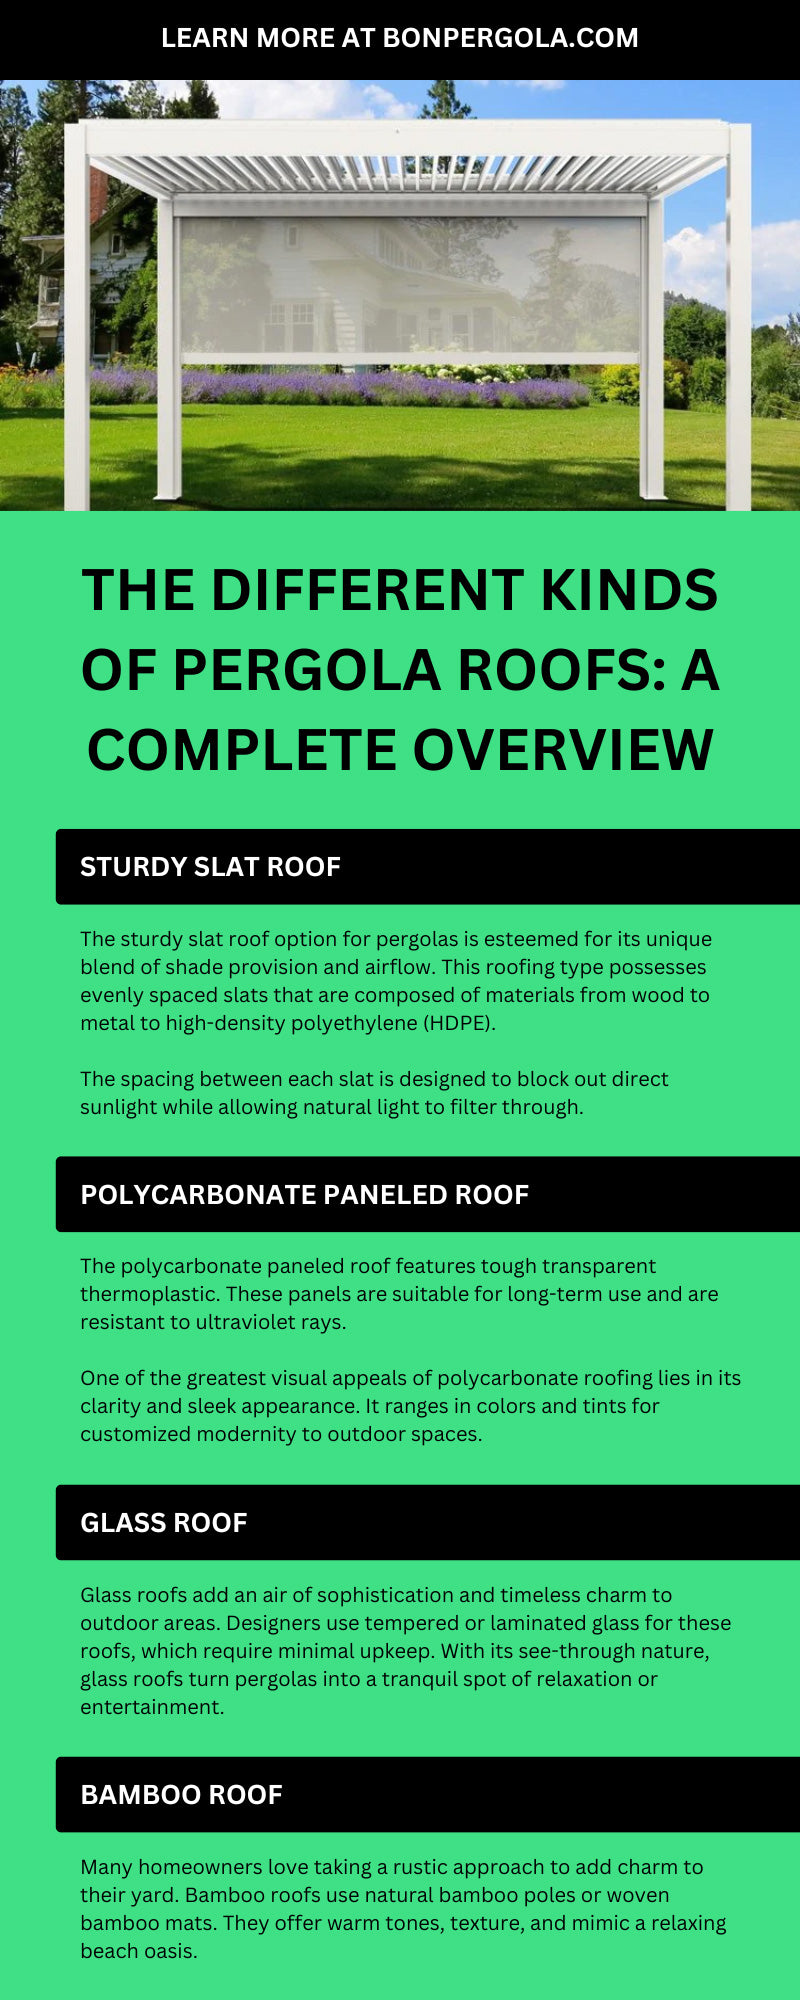 The Different Kinds of Pergola Roofs: A Complete Overview